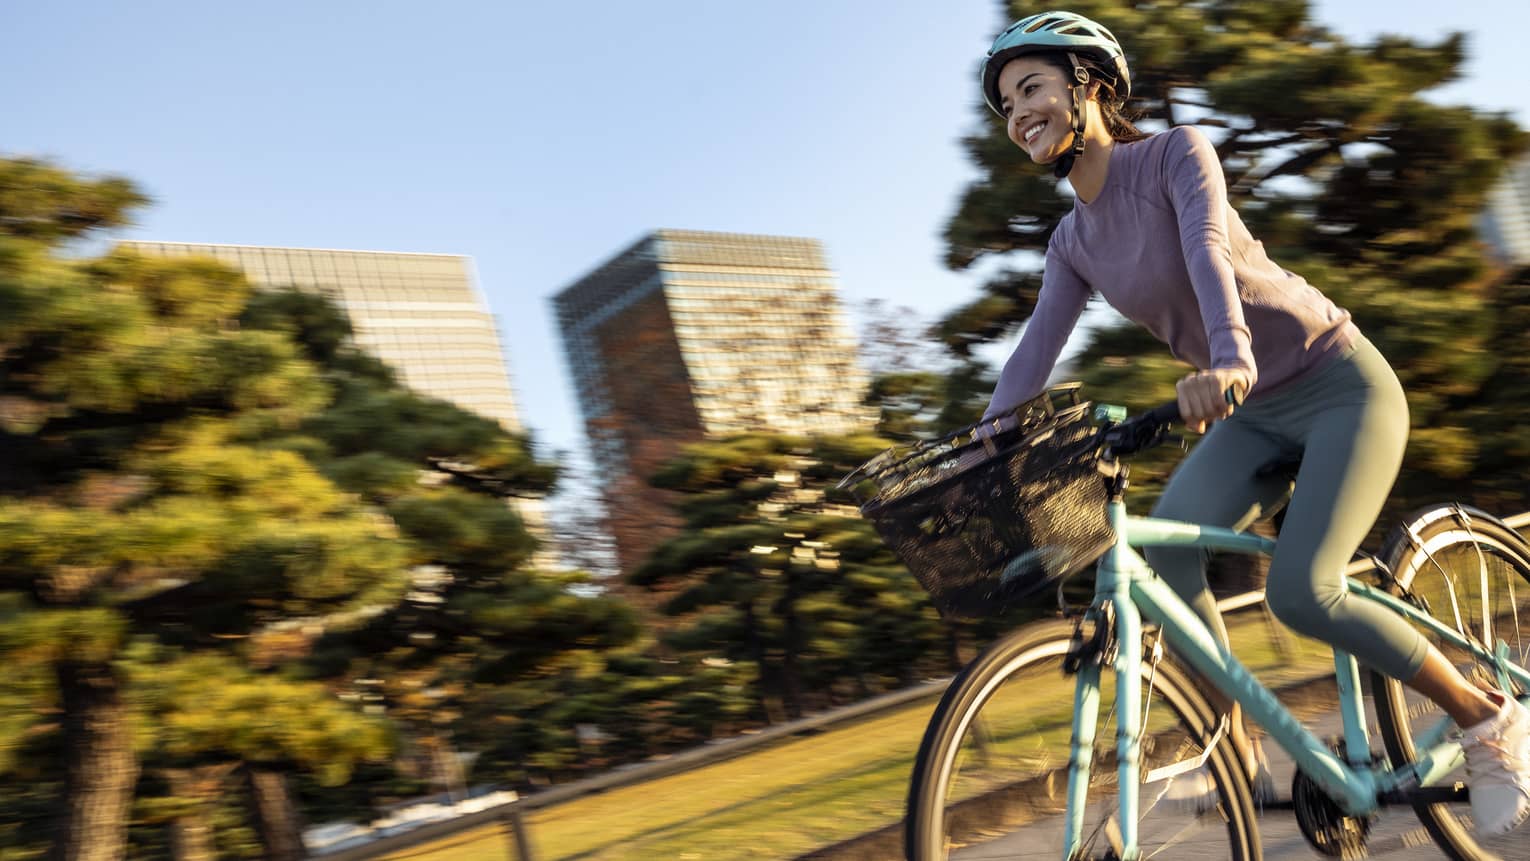 Smiling woman on teal cruiser bike with matching helmet rides by mature trees and skyscrapers of downtown Tokyo